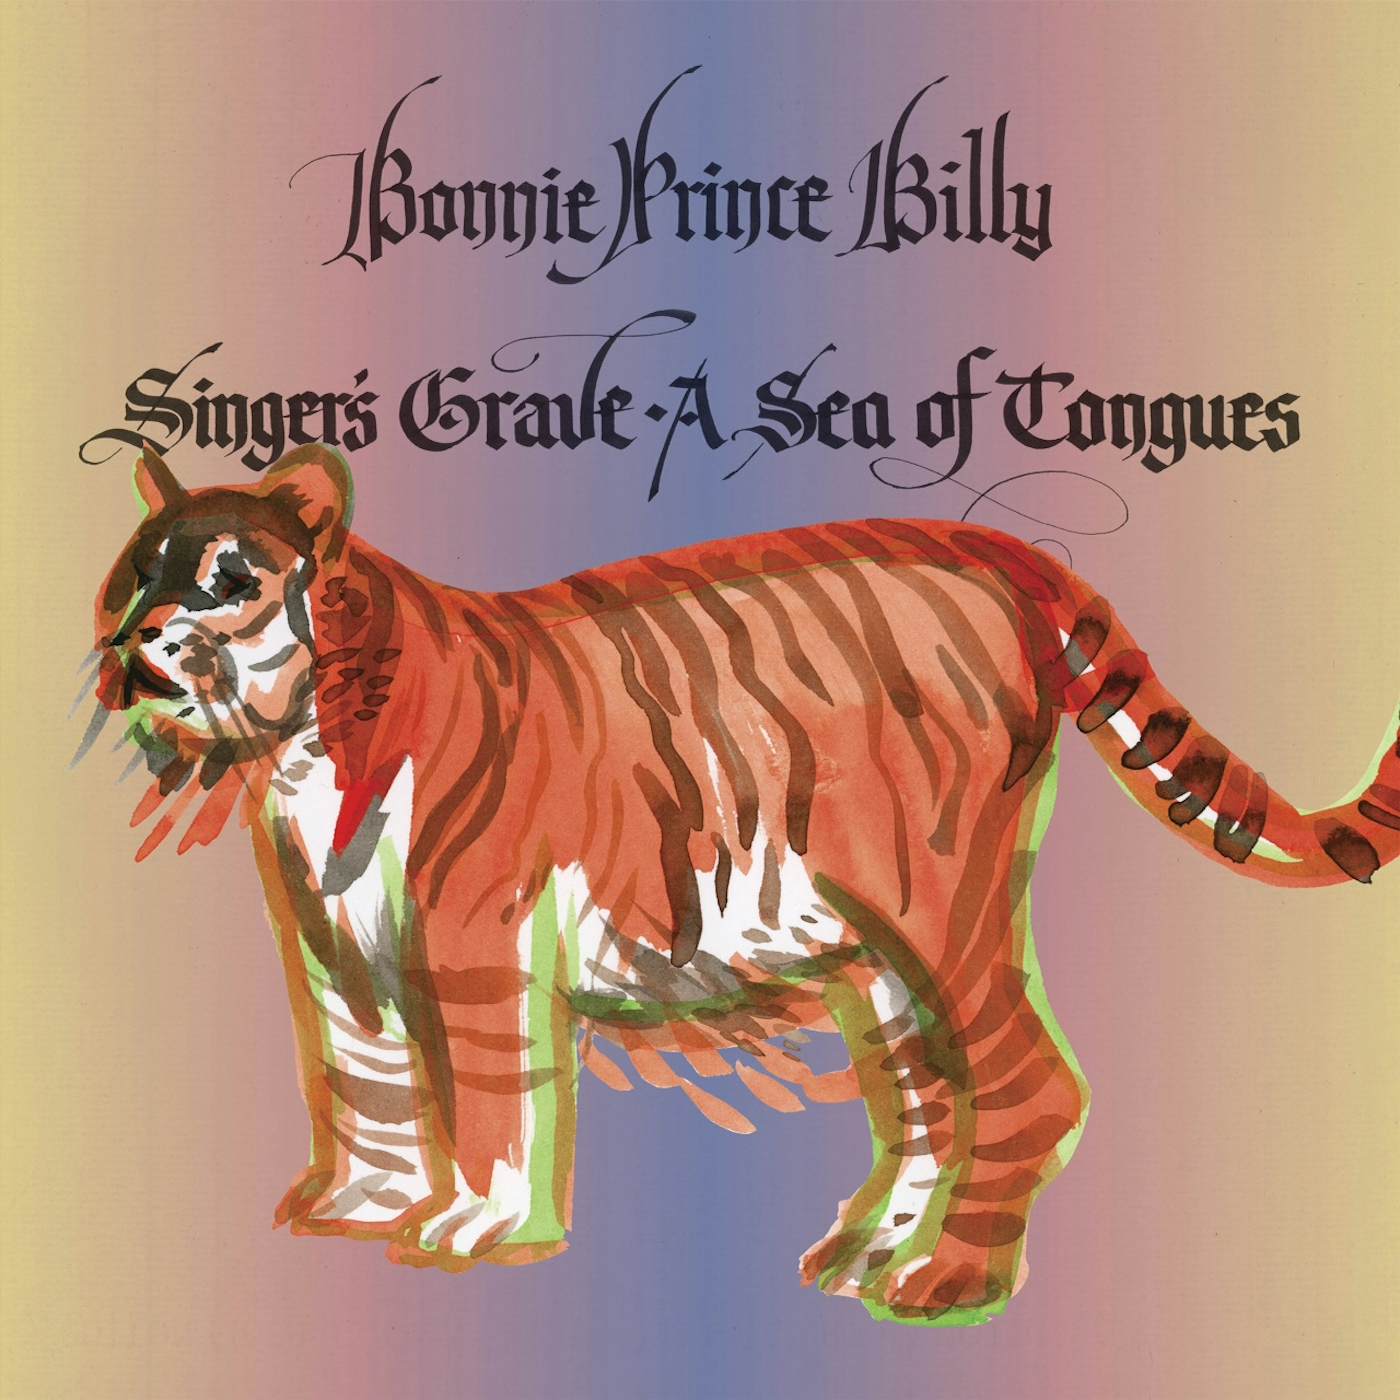 Bonnie Prince Billy SINGER'S GRAVE A SEA OF TONGUES CD